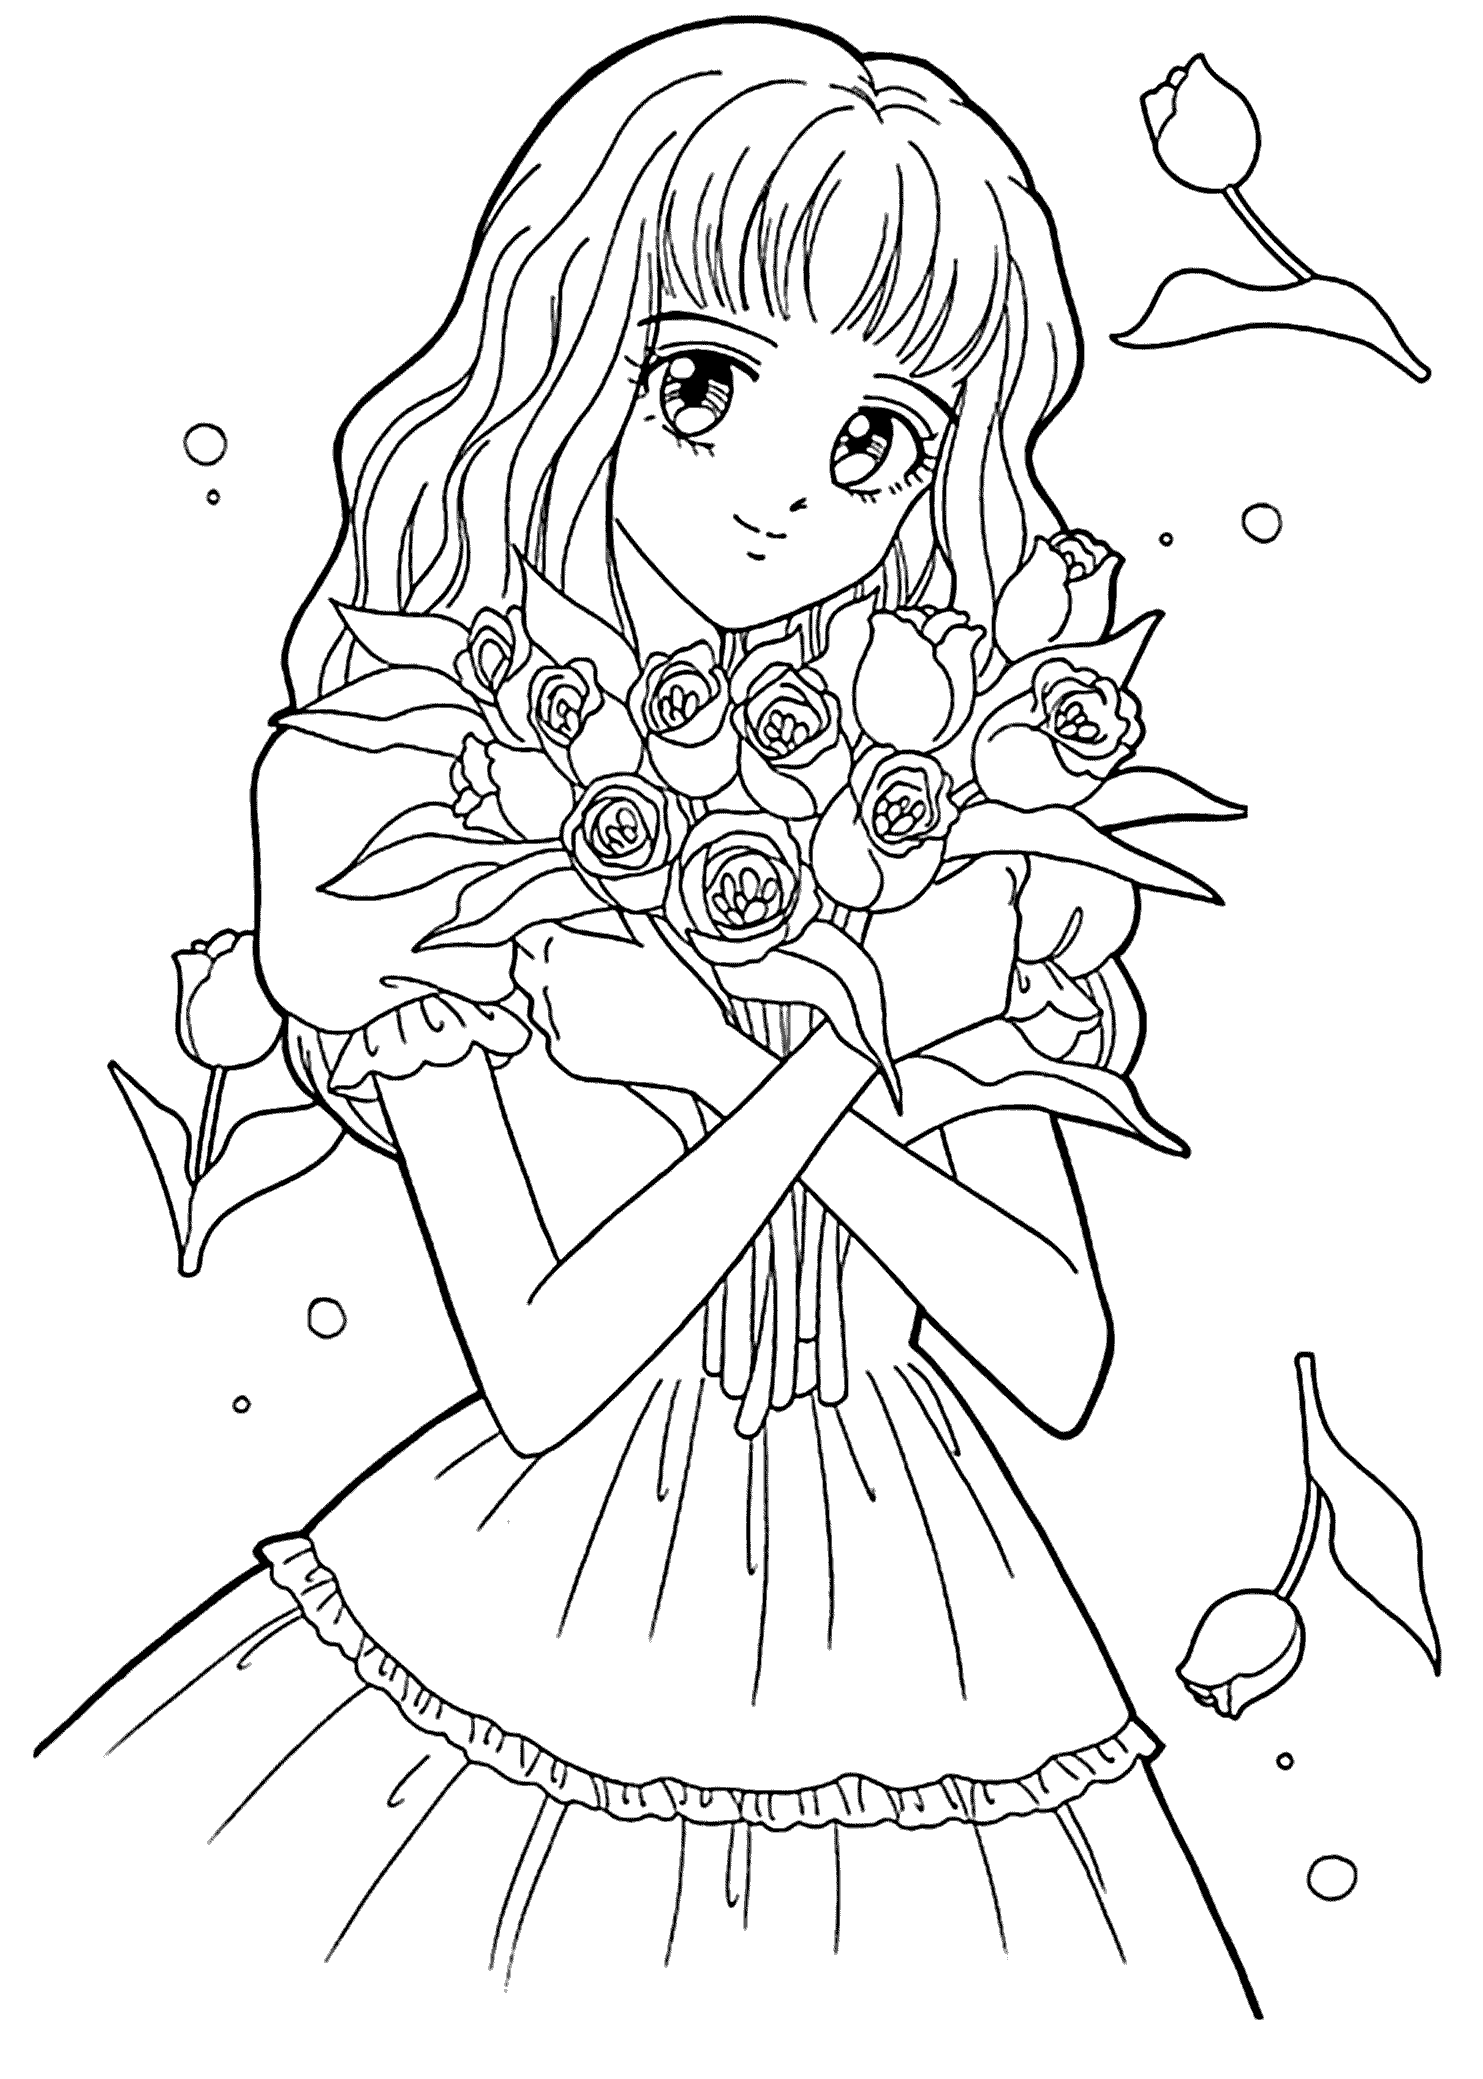 girl pictures to color and print cute girl coloring pages to download and print for free girl color print to pictures and 